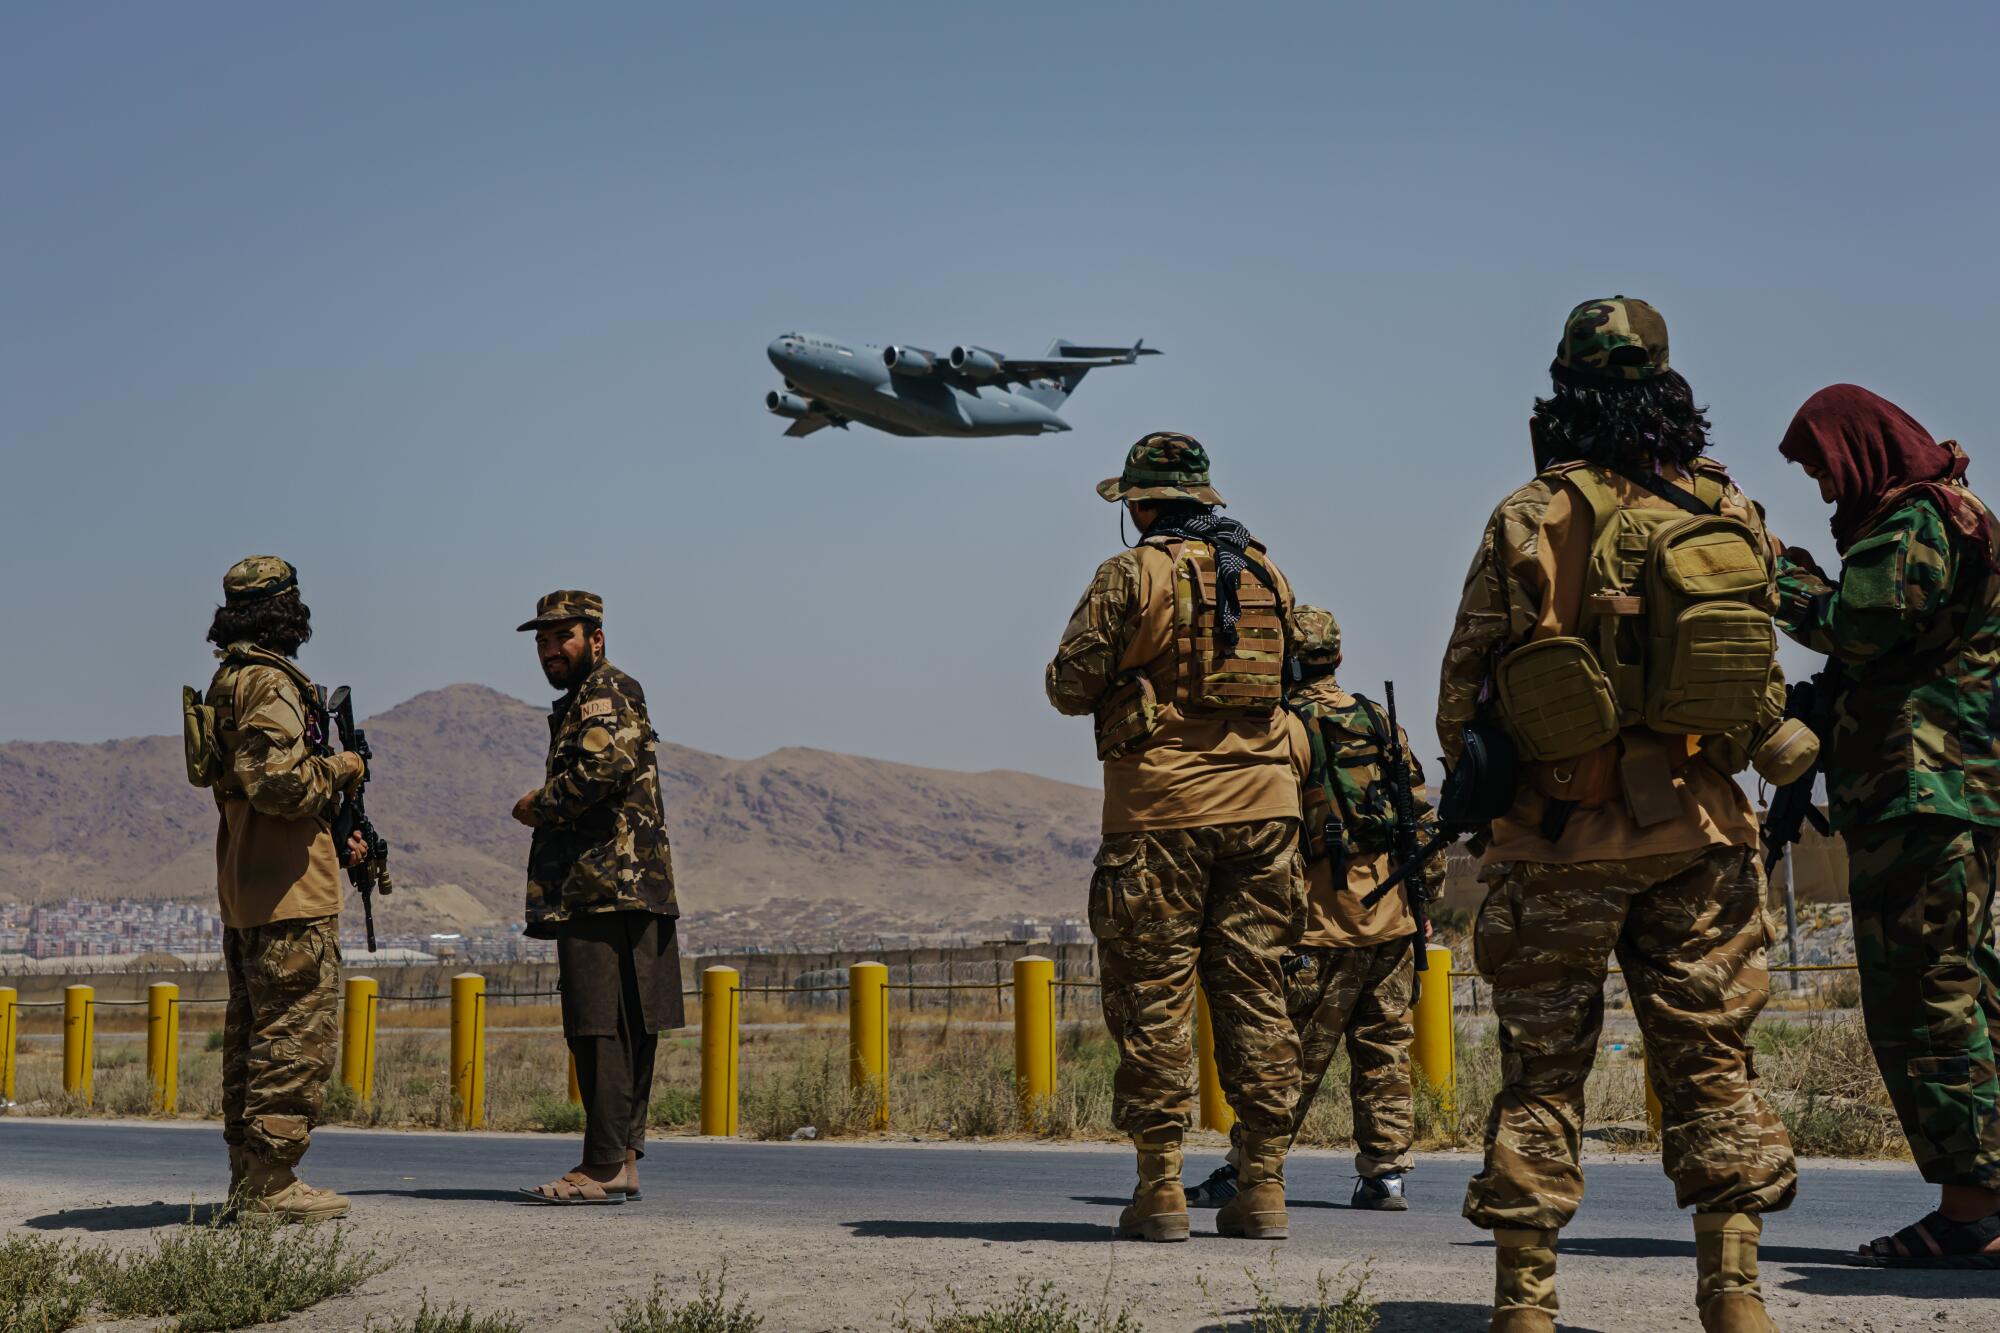 A C-17 Globemaster aircraft takes off as armed men watch.